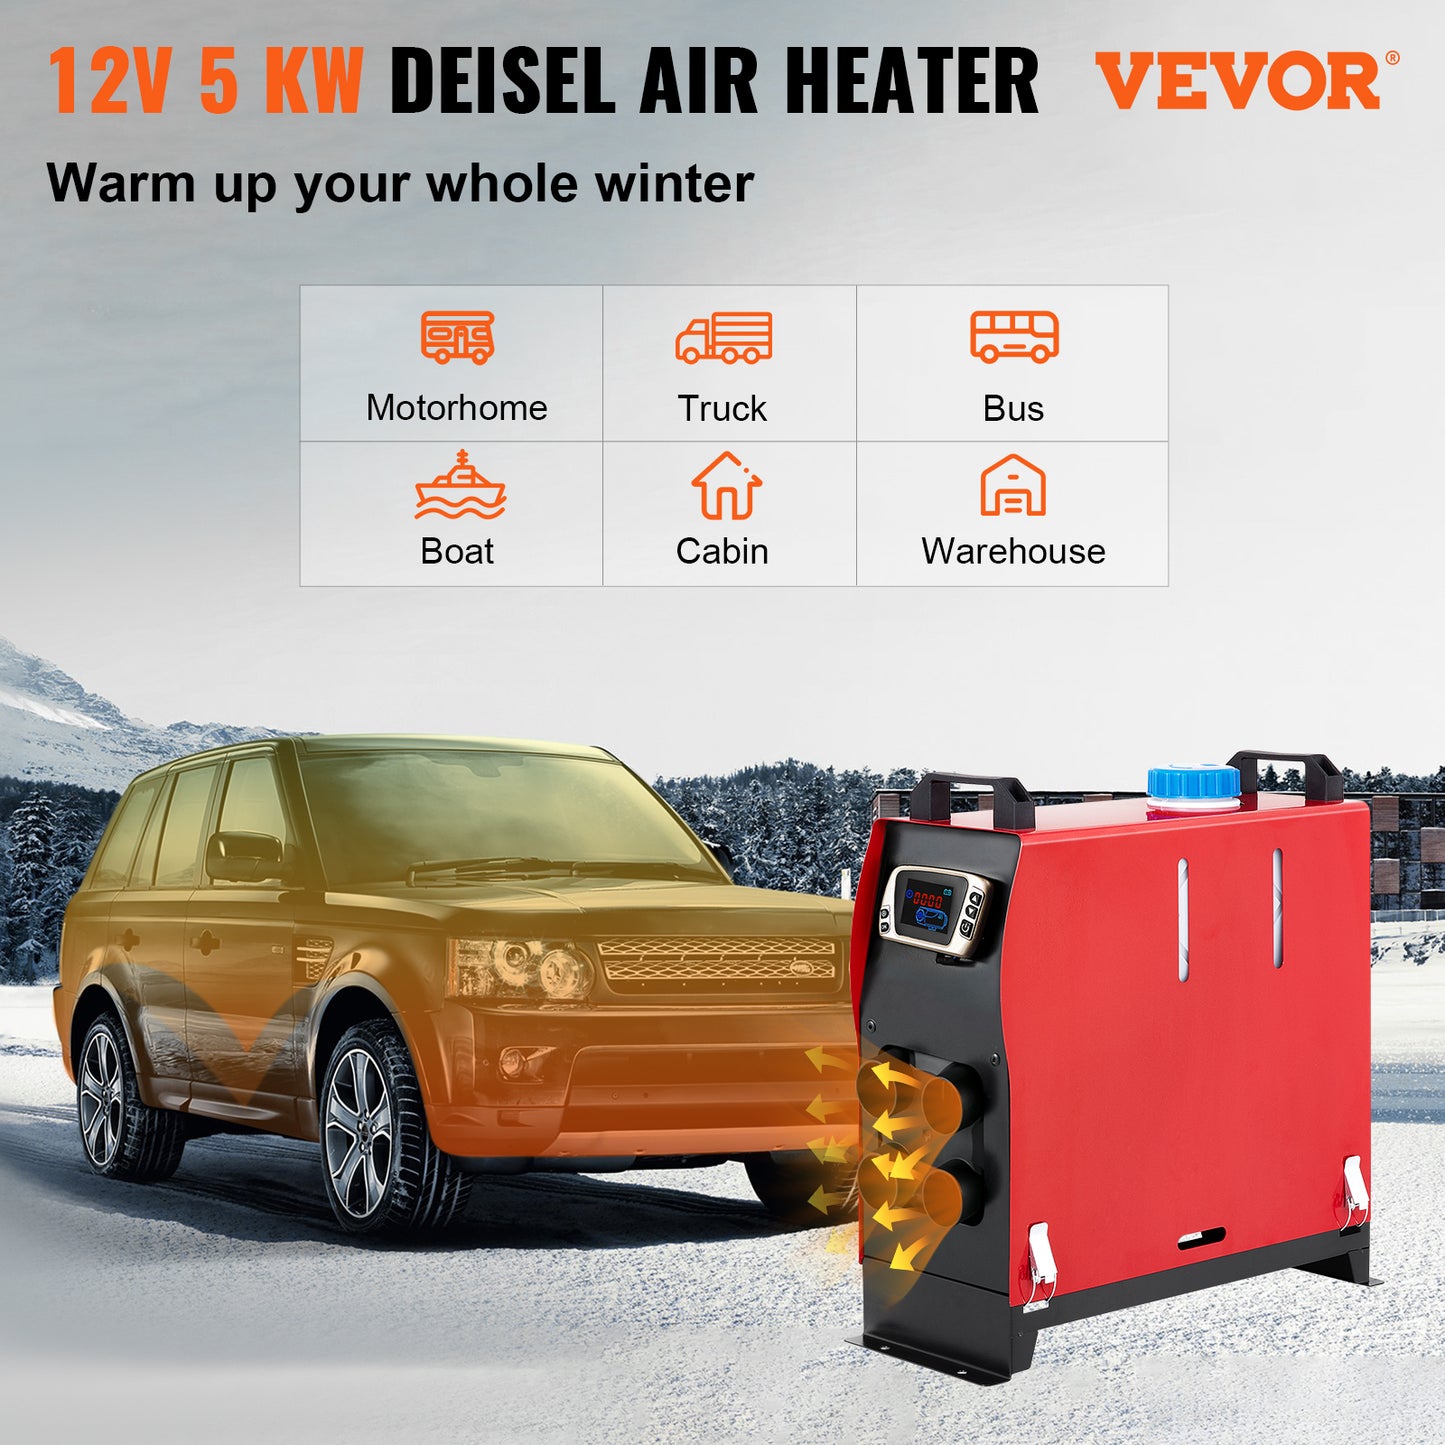 5KW All-In-One Diesel Parking Heater for Car/Truck/Boat - LCD, 12V, 4-Hole (Plateau Edition)